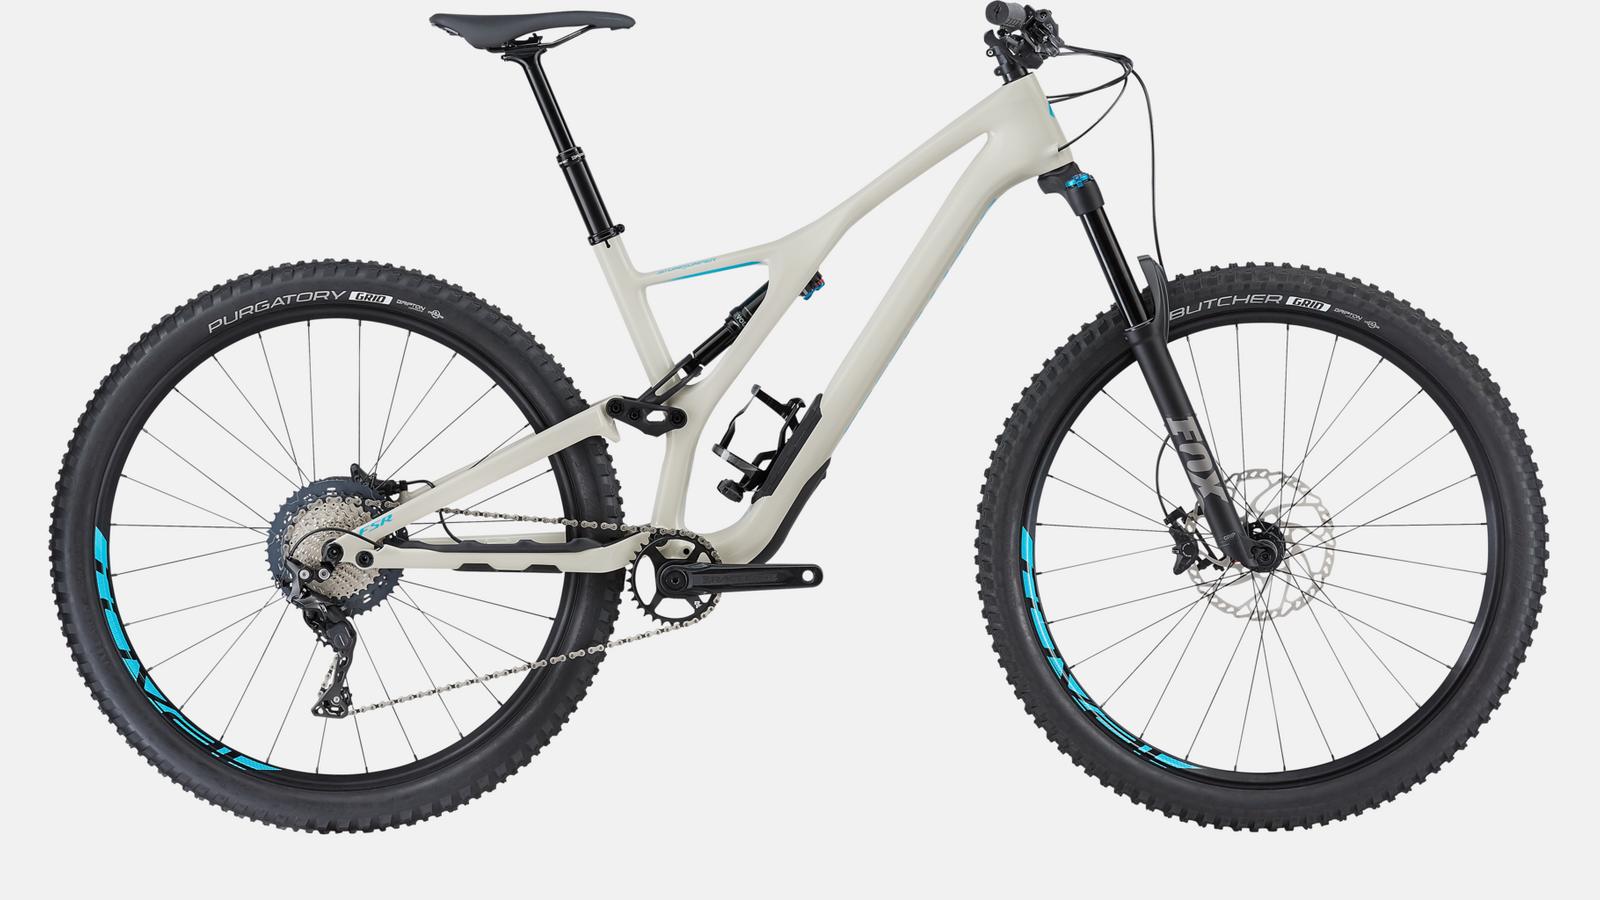 Paint for 2018 Specialized Men's Stumpjumper Comp Carbon 29 - Gloss White Mountains